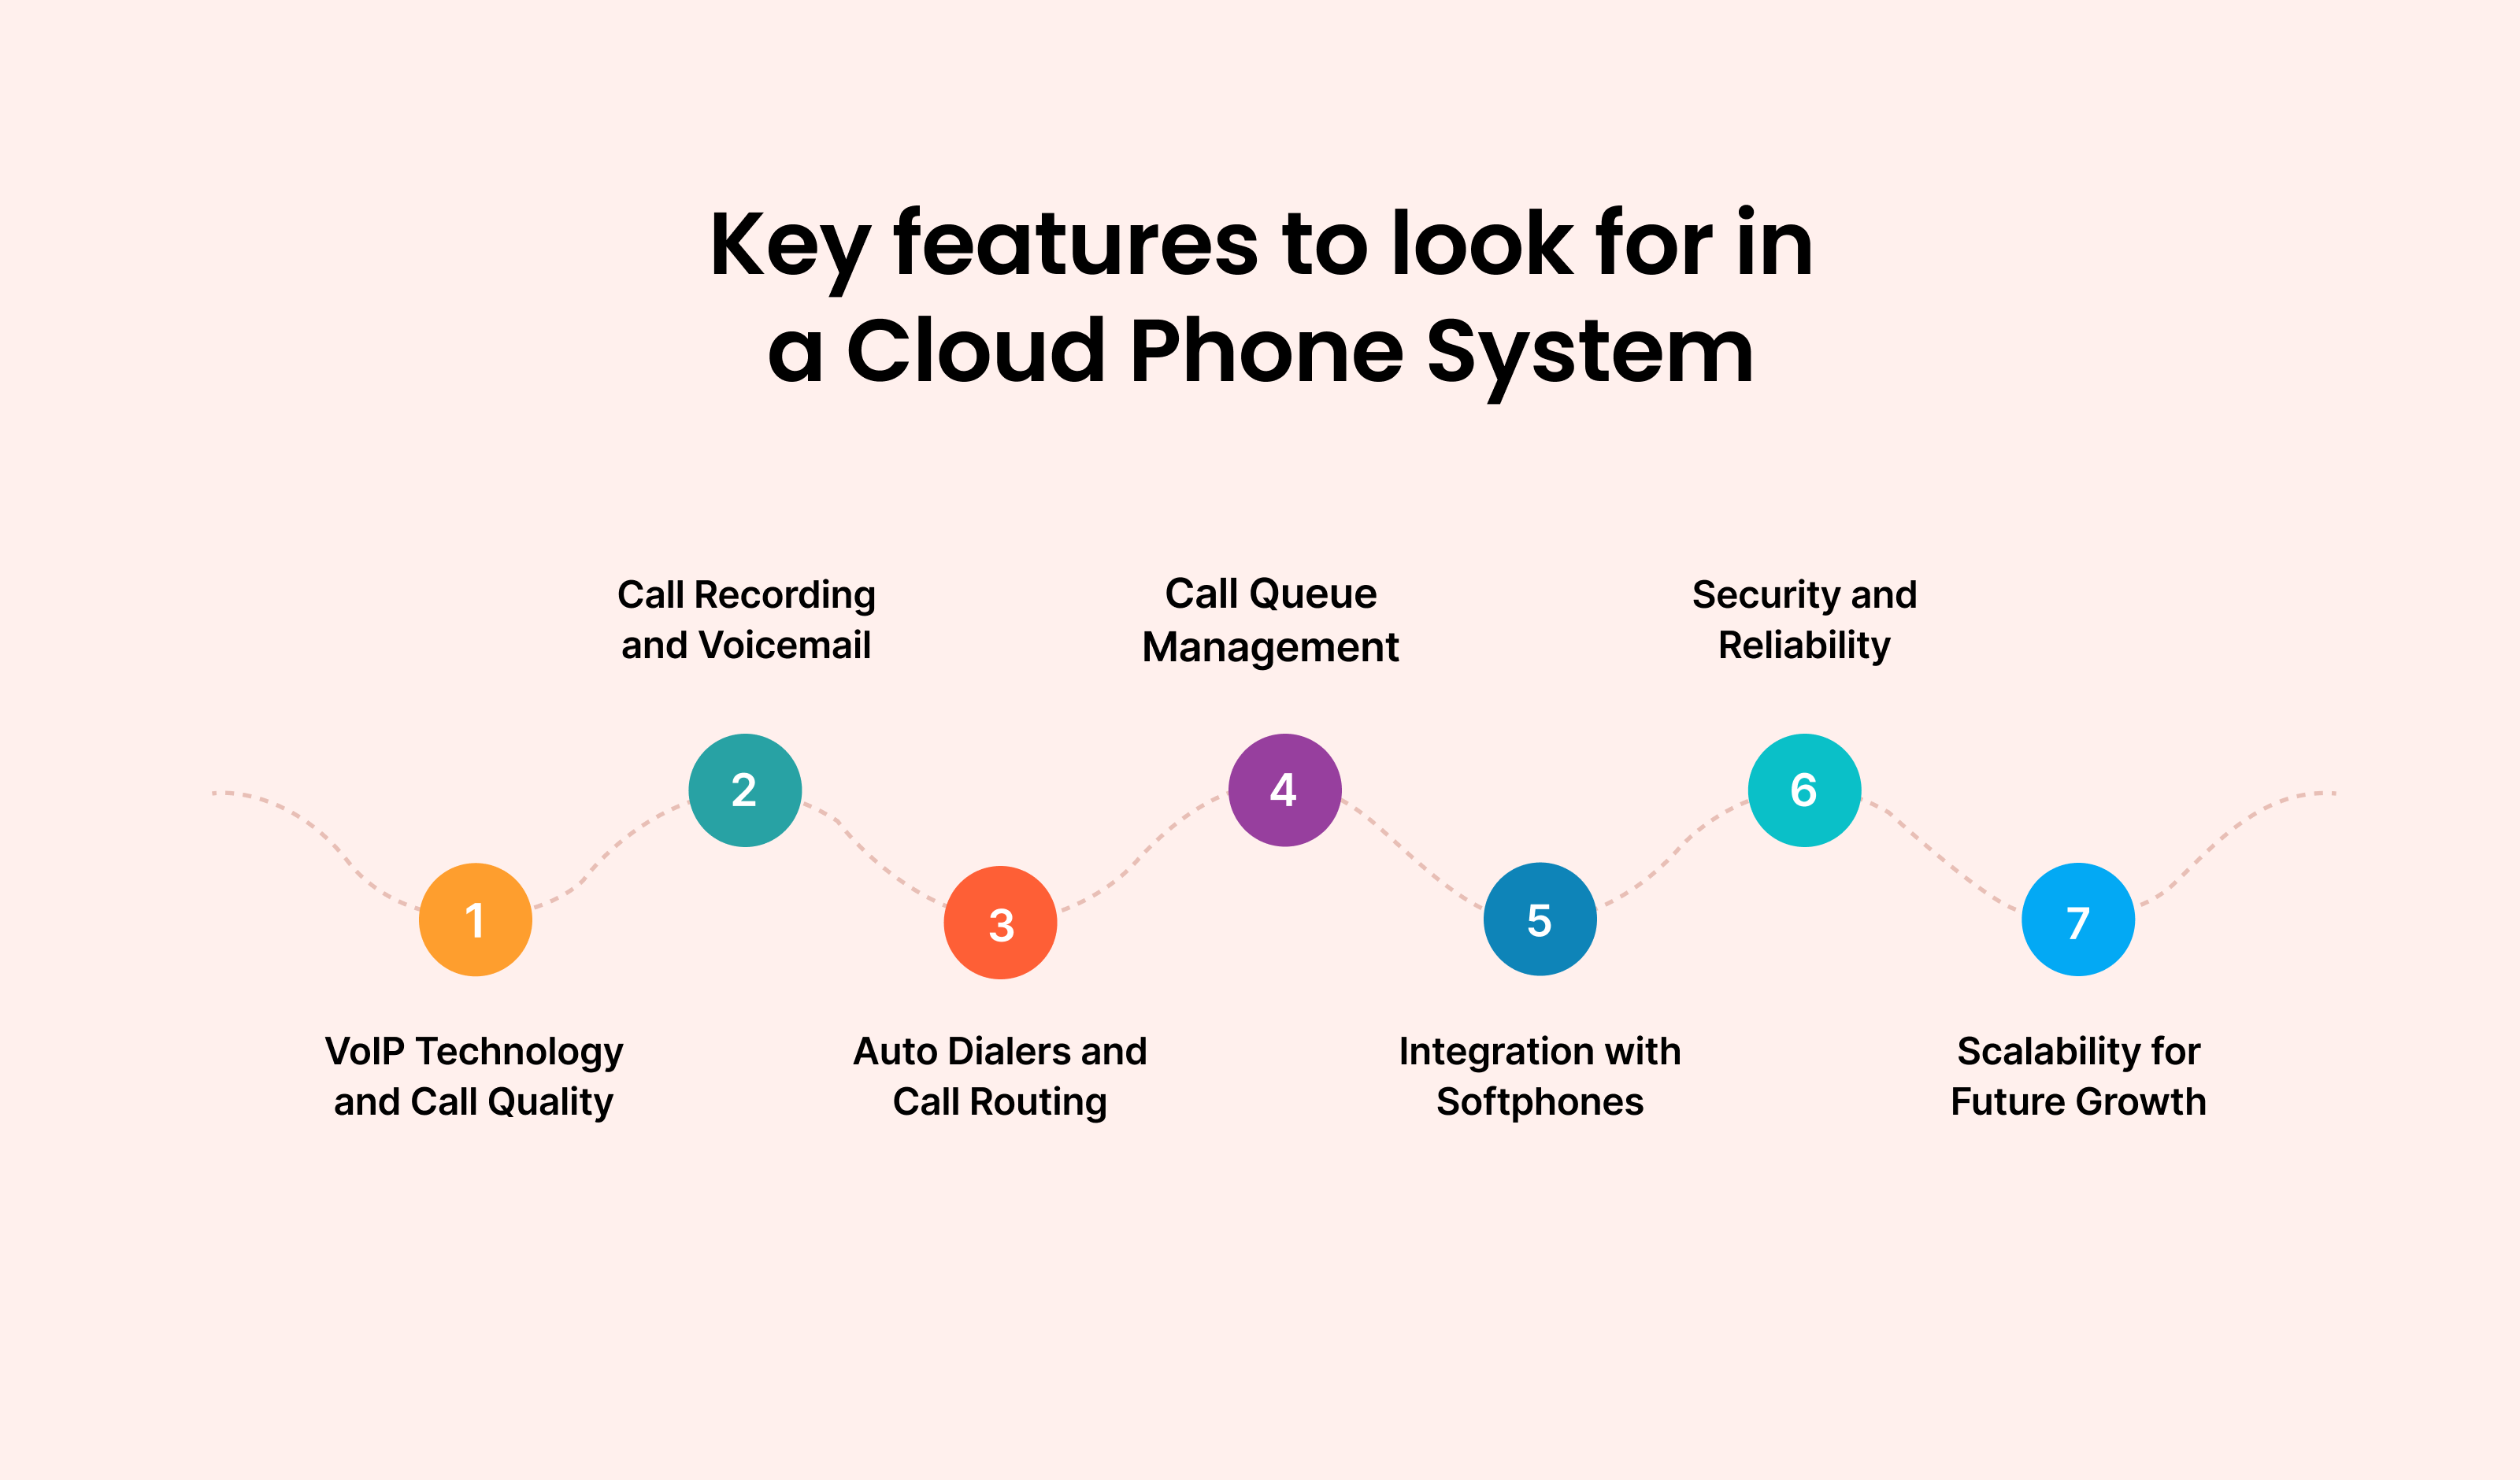 Key Features to Look for in a Cloud Phone System: